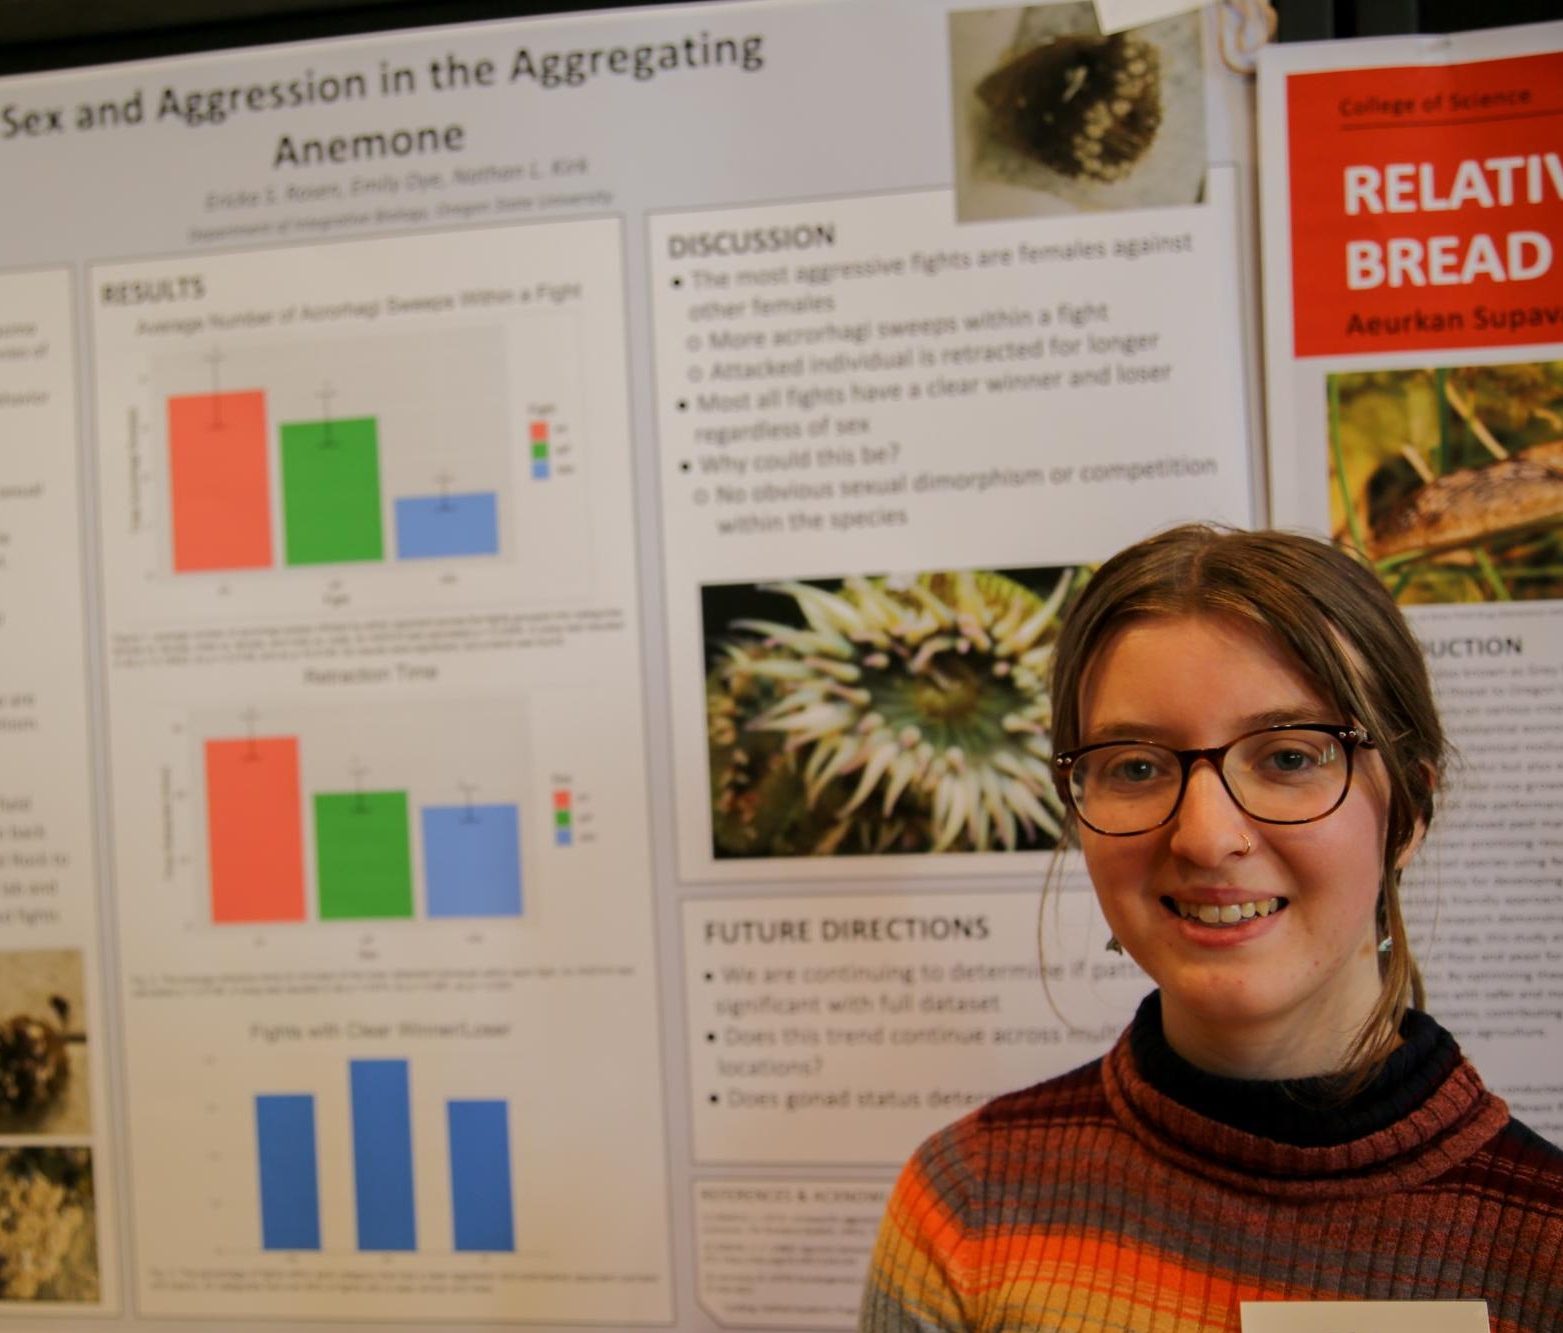 Ericka Rosen presents her research on the aggregating anemone at the Spring Poster Symposium, held at the Memorial Union on May 16. 